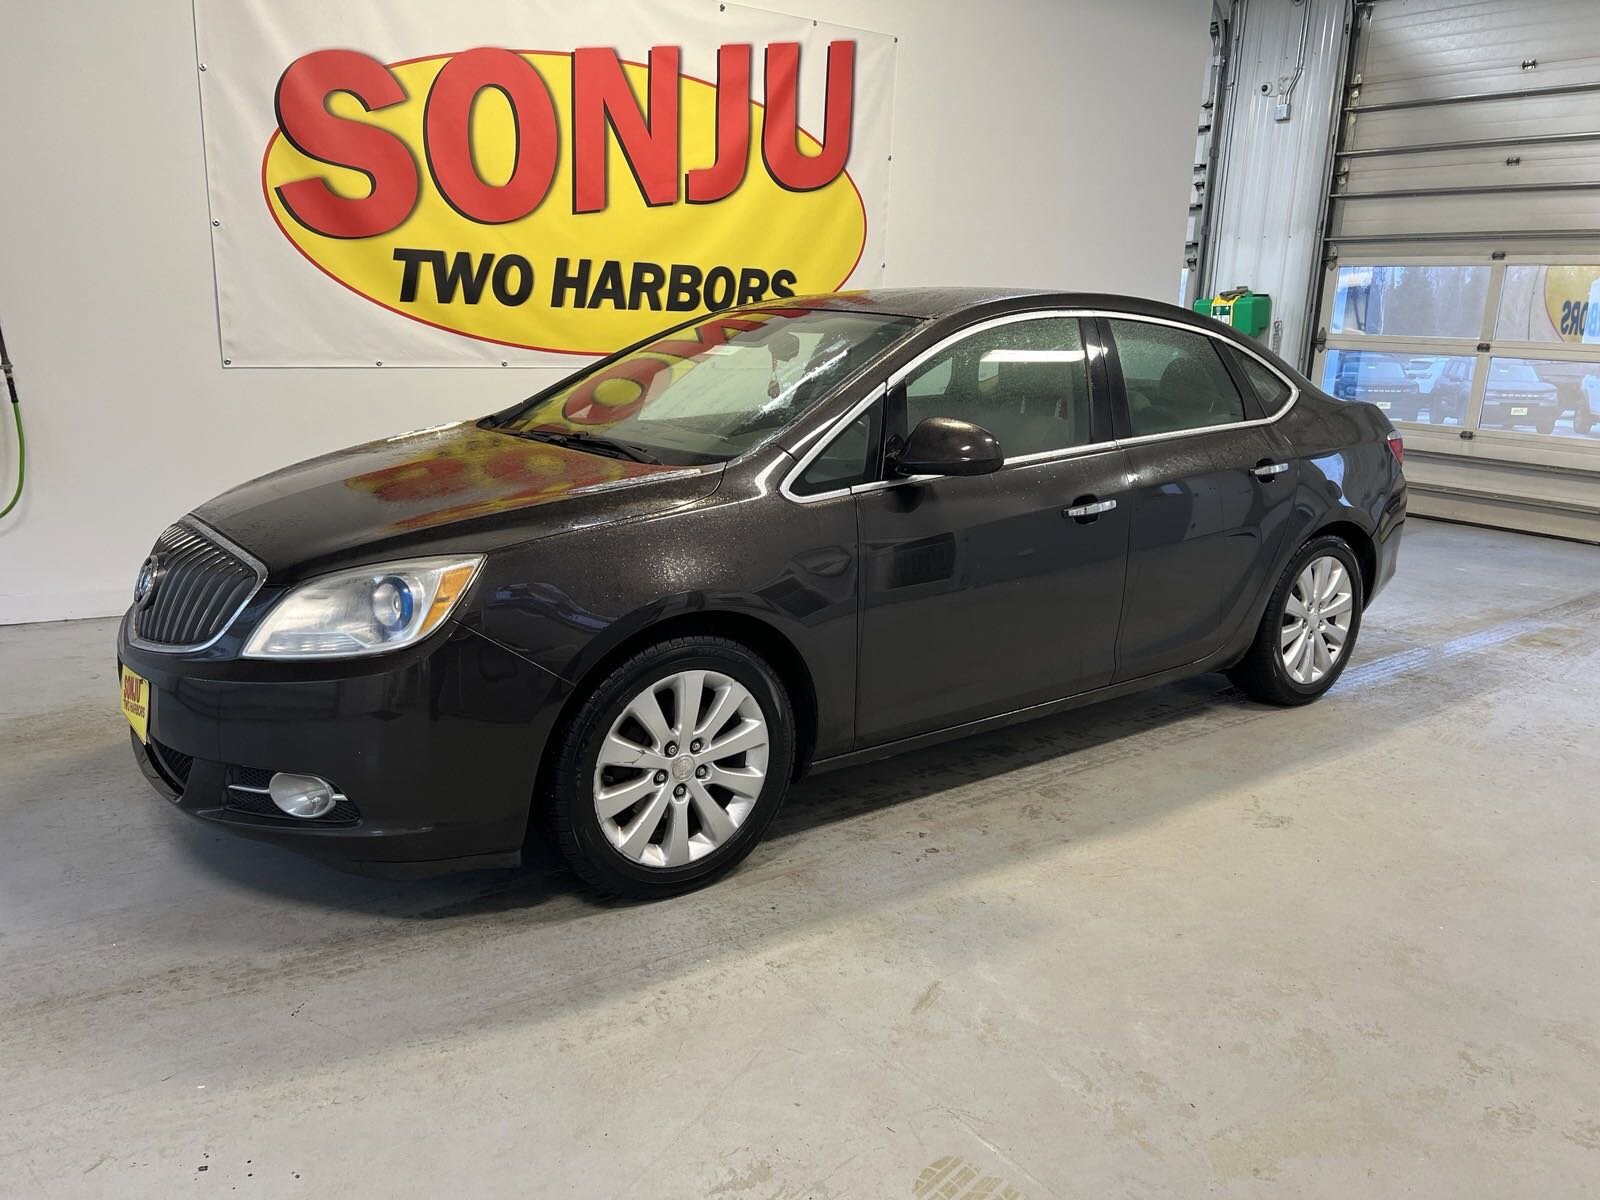 Used 2013 Buick Verano 1SG with VIN 1G4PR5SK9D4148691 for sale in Two Harbors, Minnesota